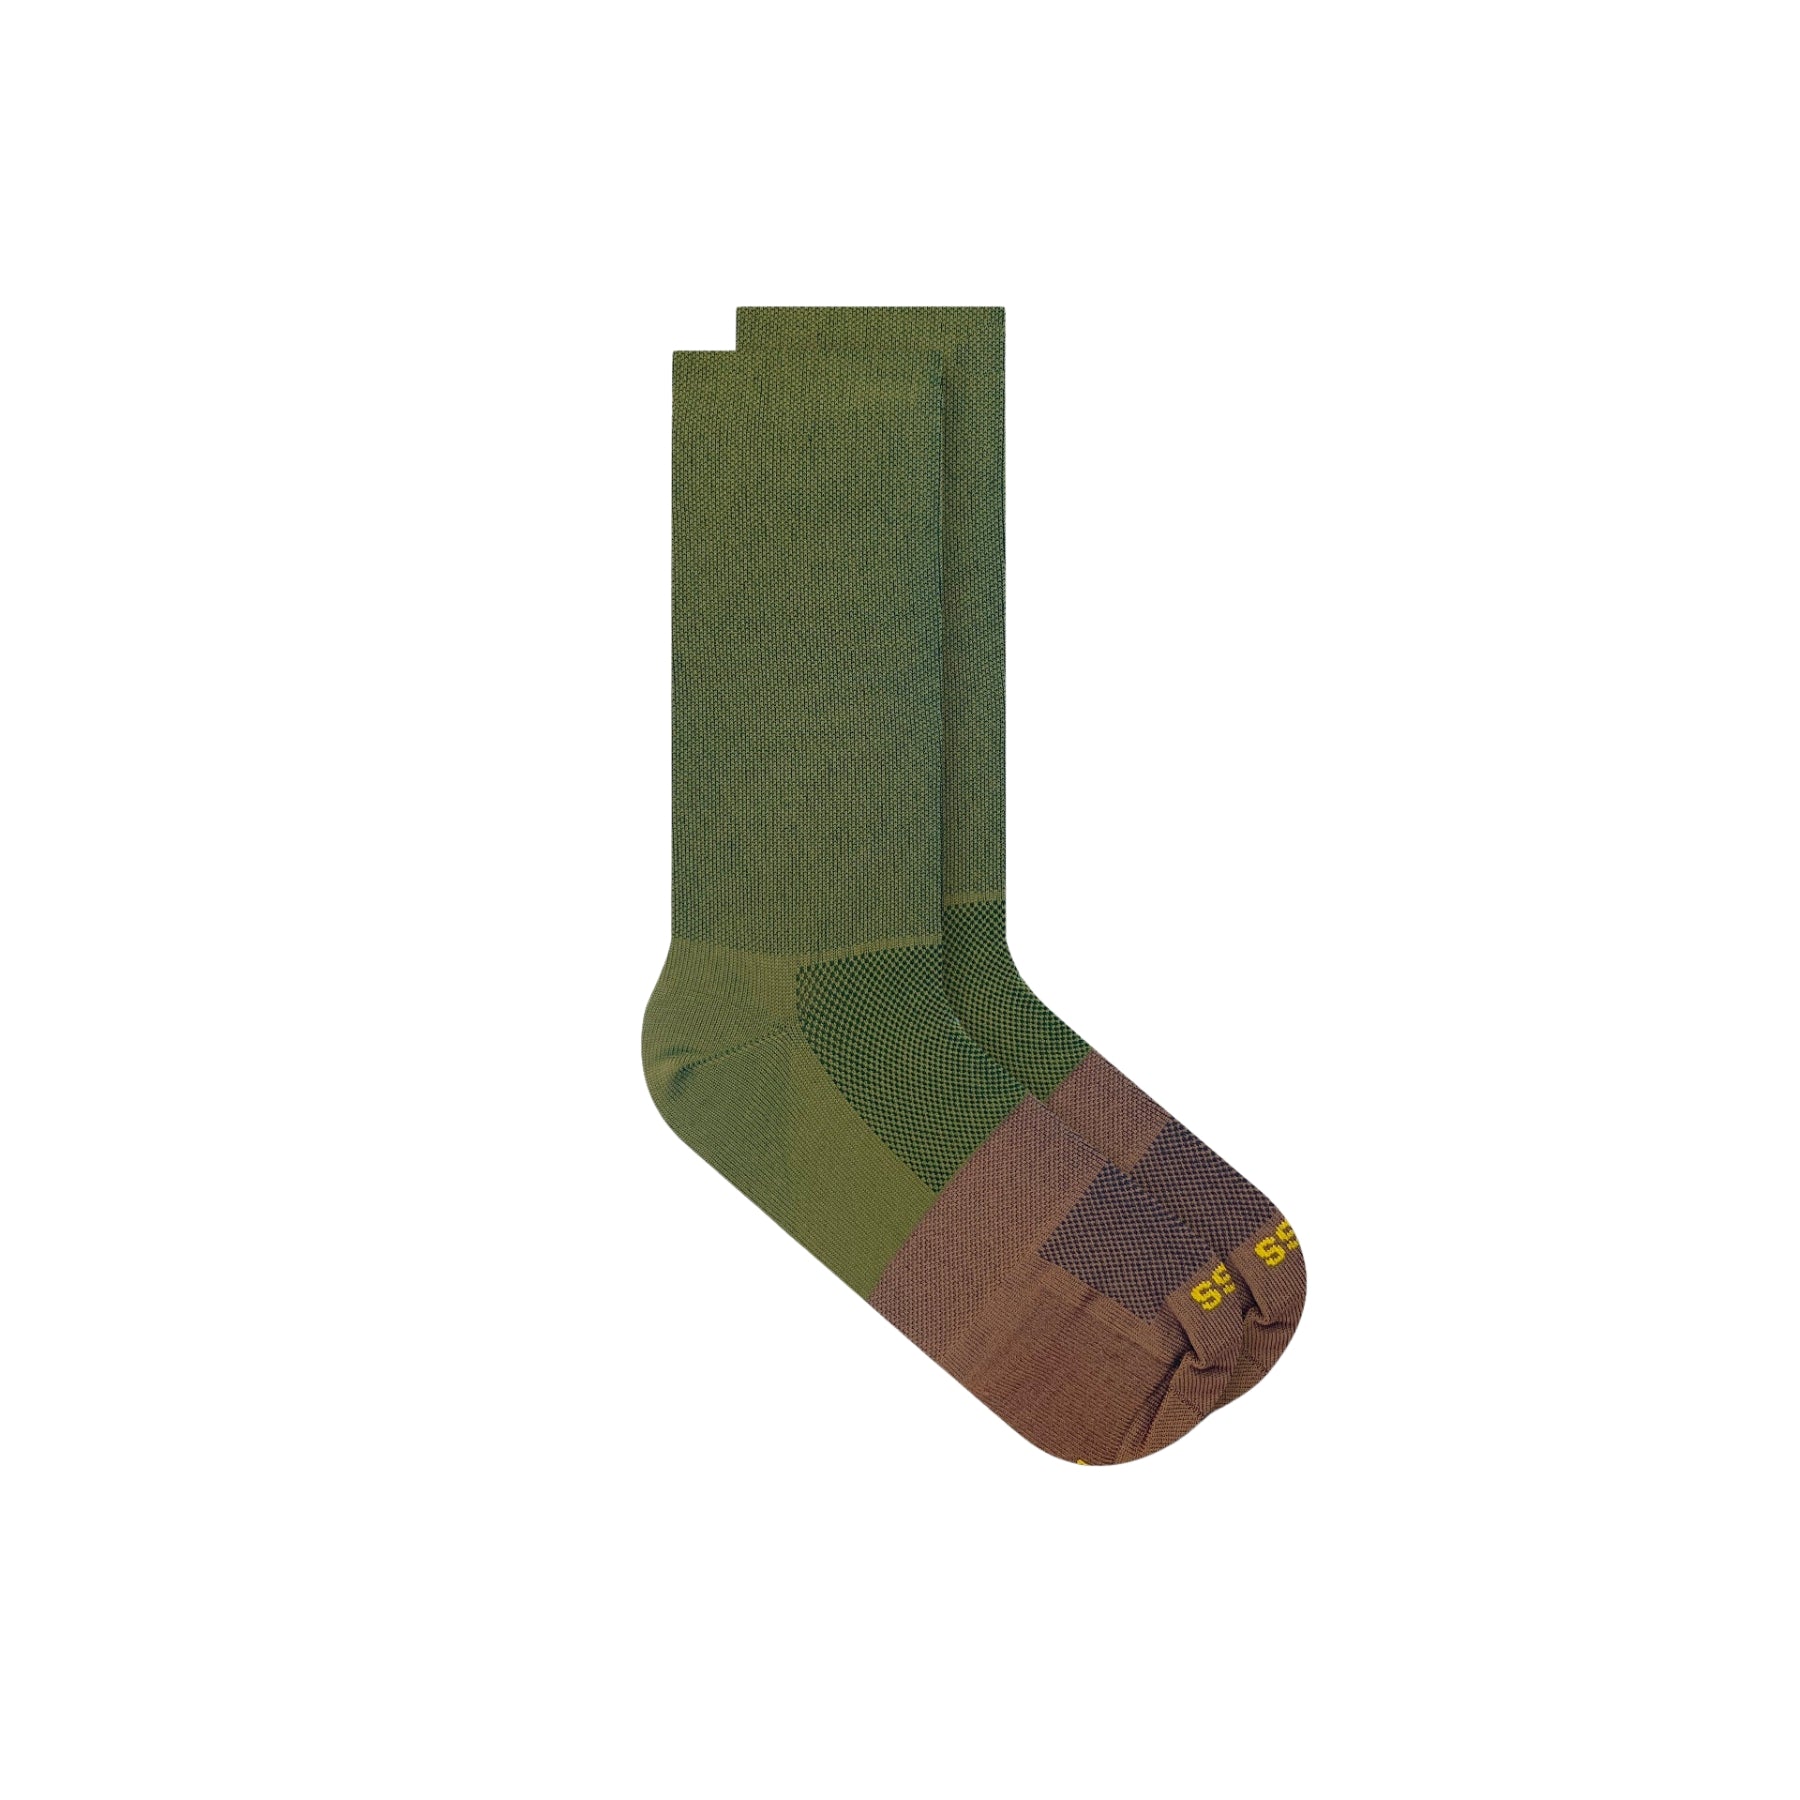 Calcetines de ciclismo NDLESS Olive